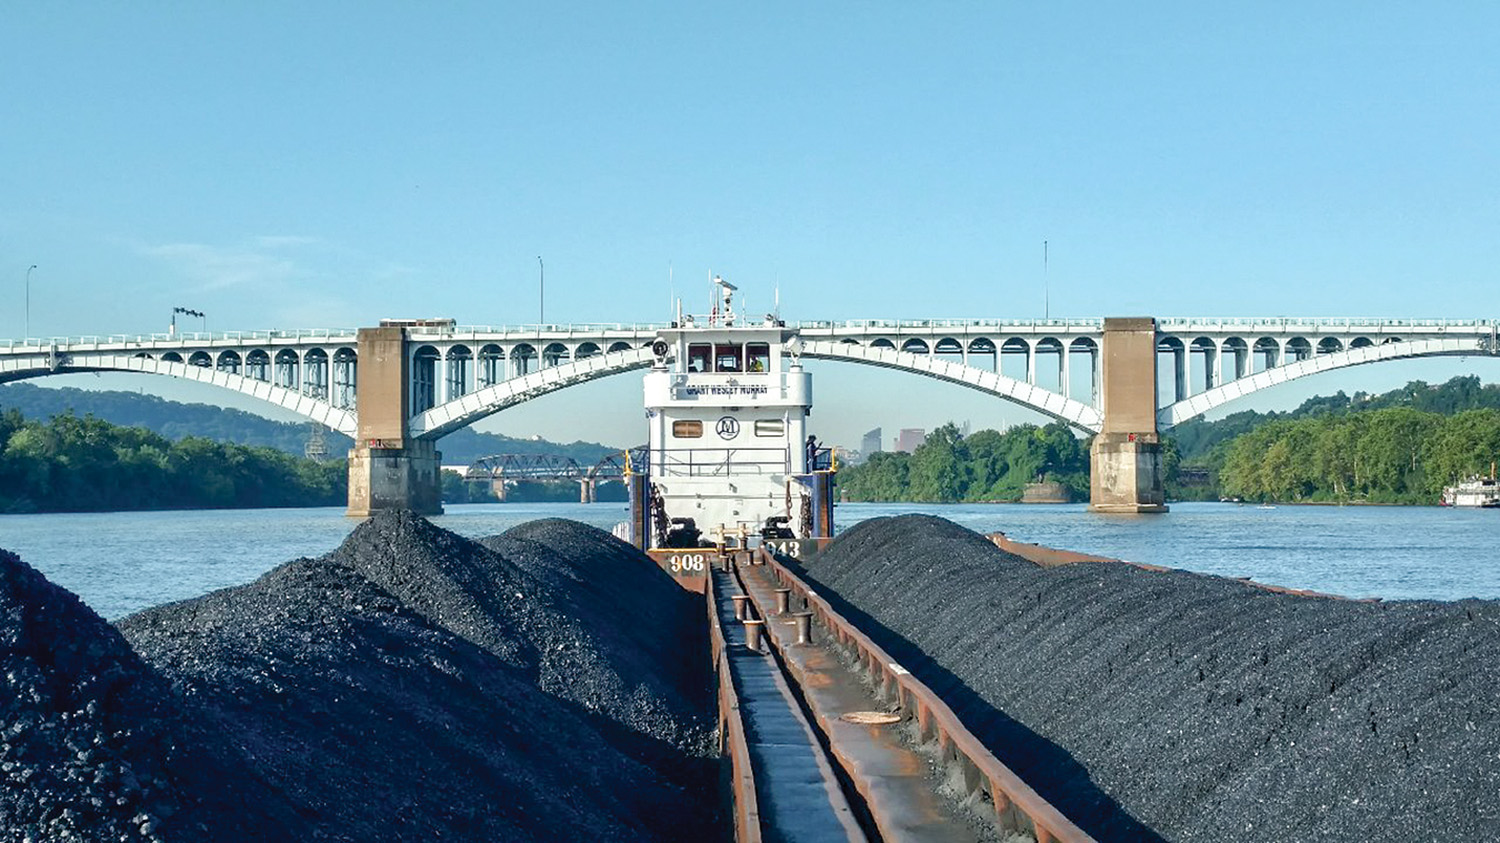 Coal has long been the primary cargo shipped through the Port of Pittsburgh. (Pphoto courtesy of the Port of Pittsburgh Commission)